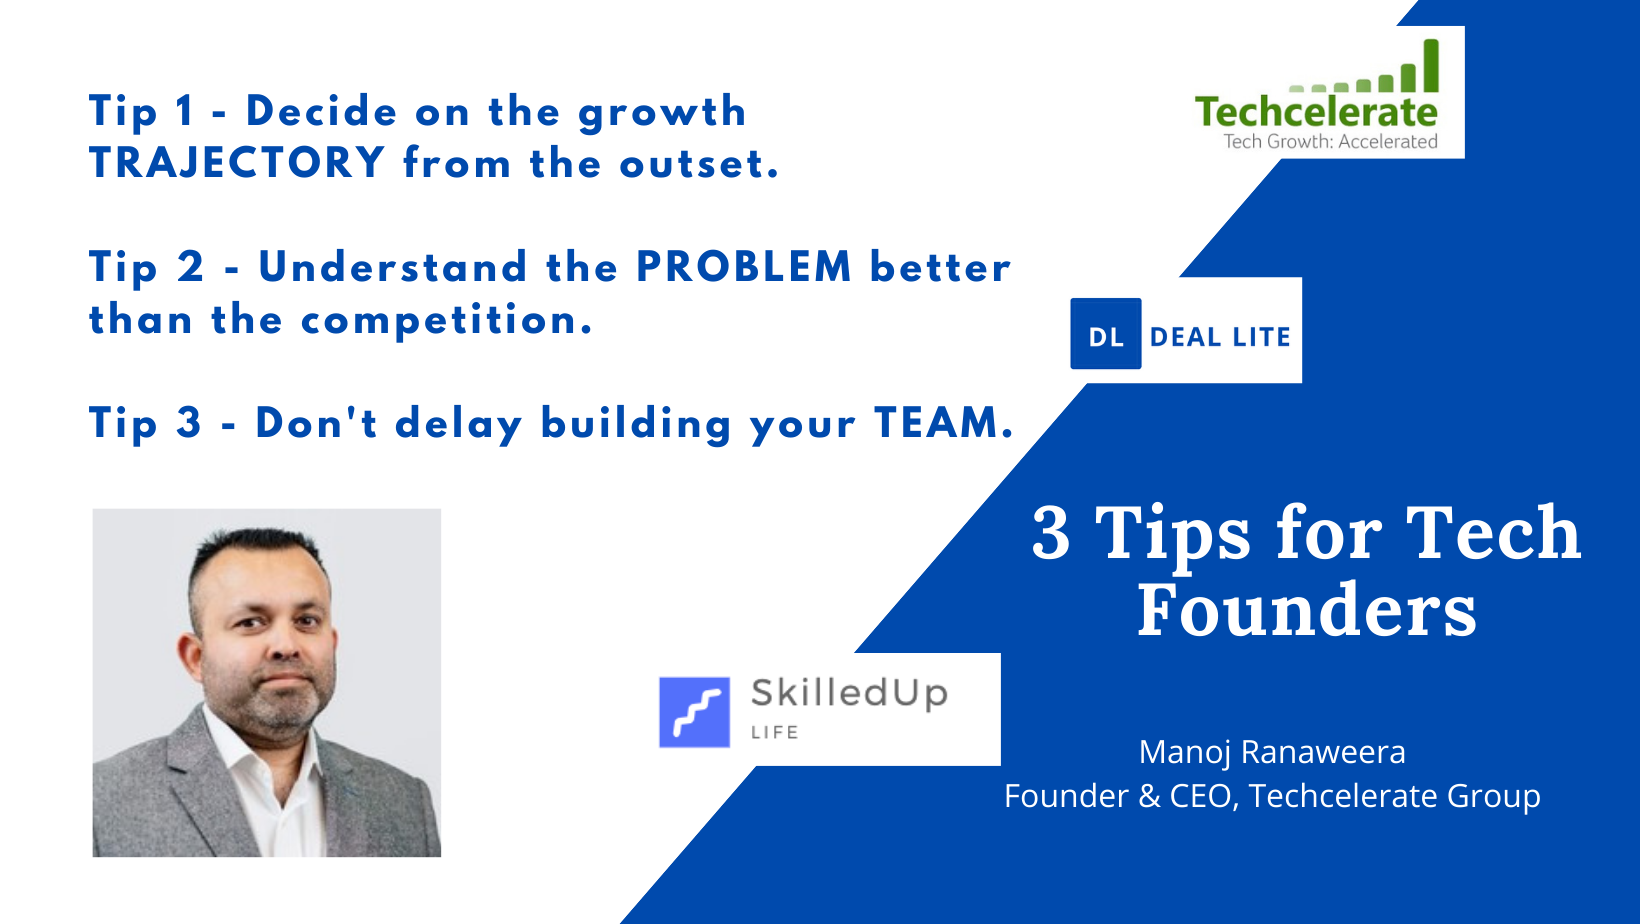 3 Tips for Tech Founders